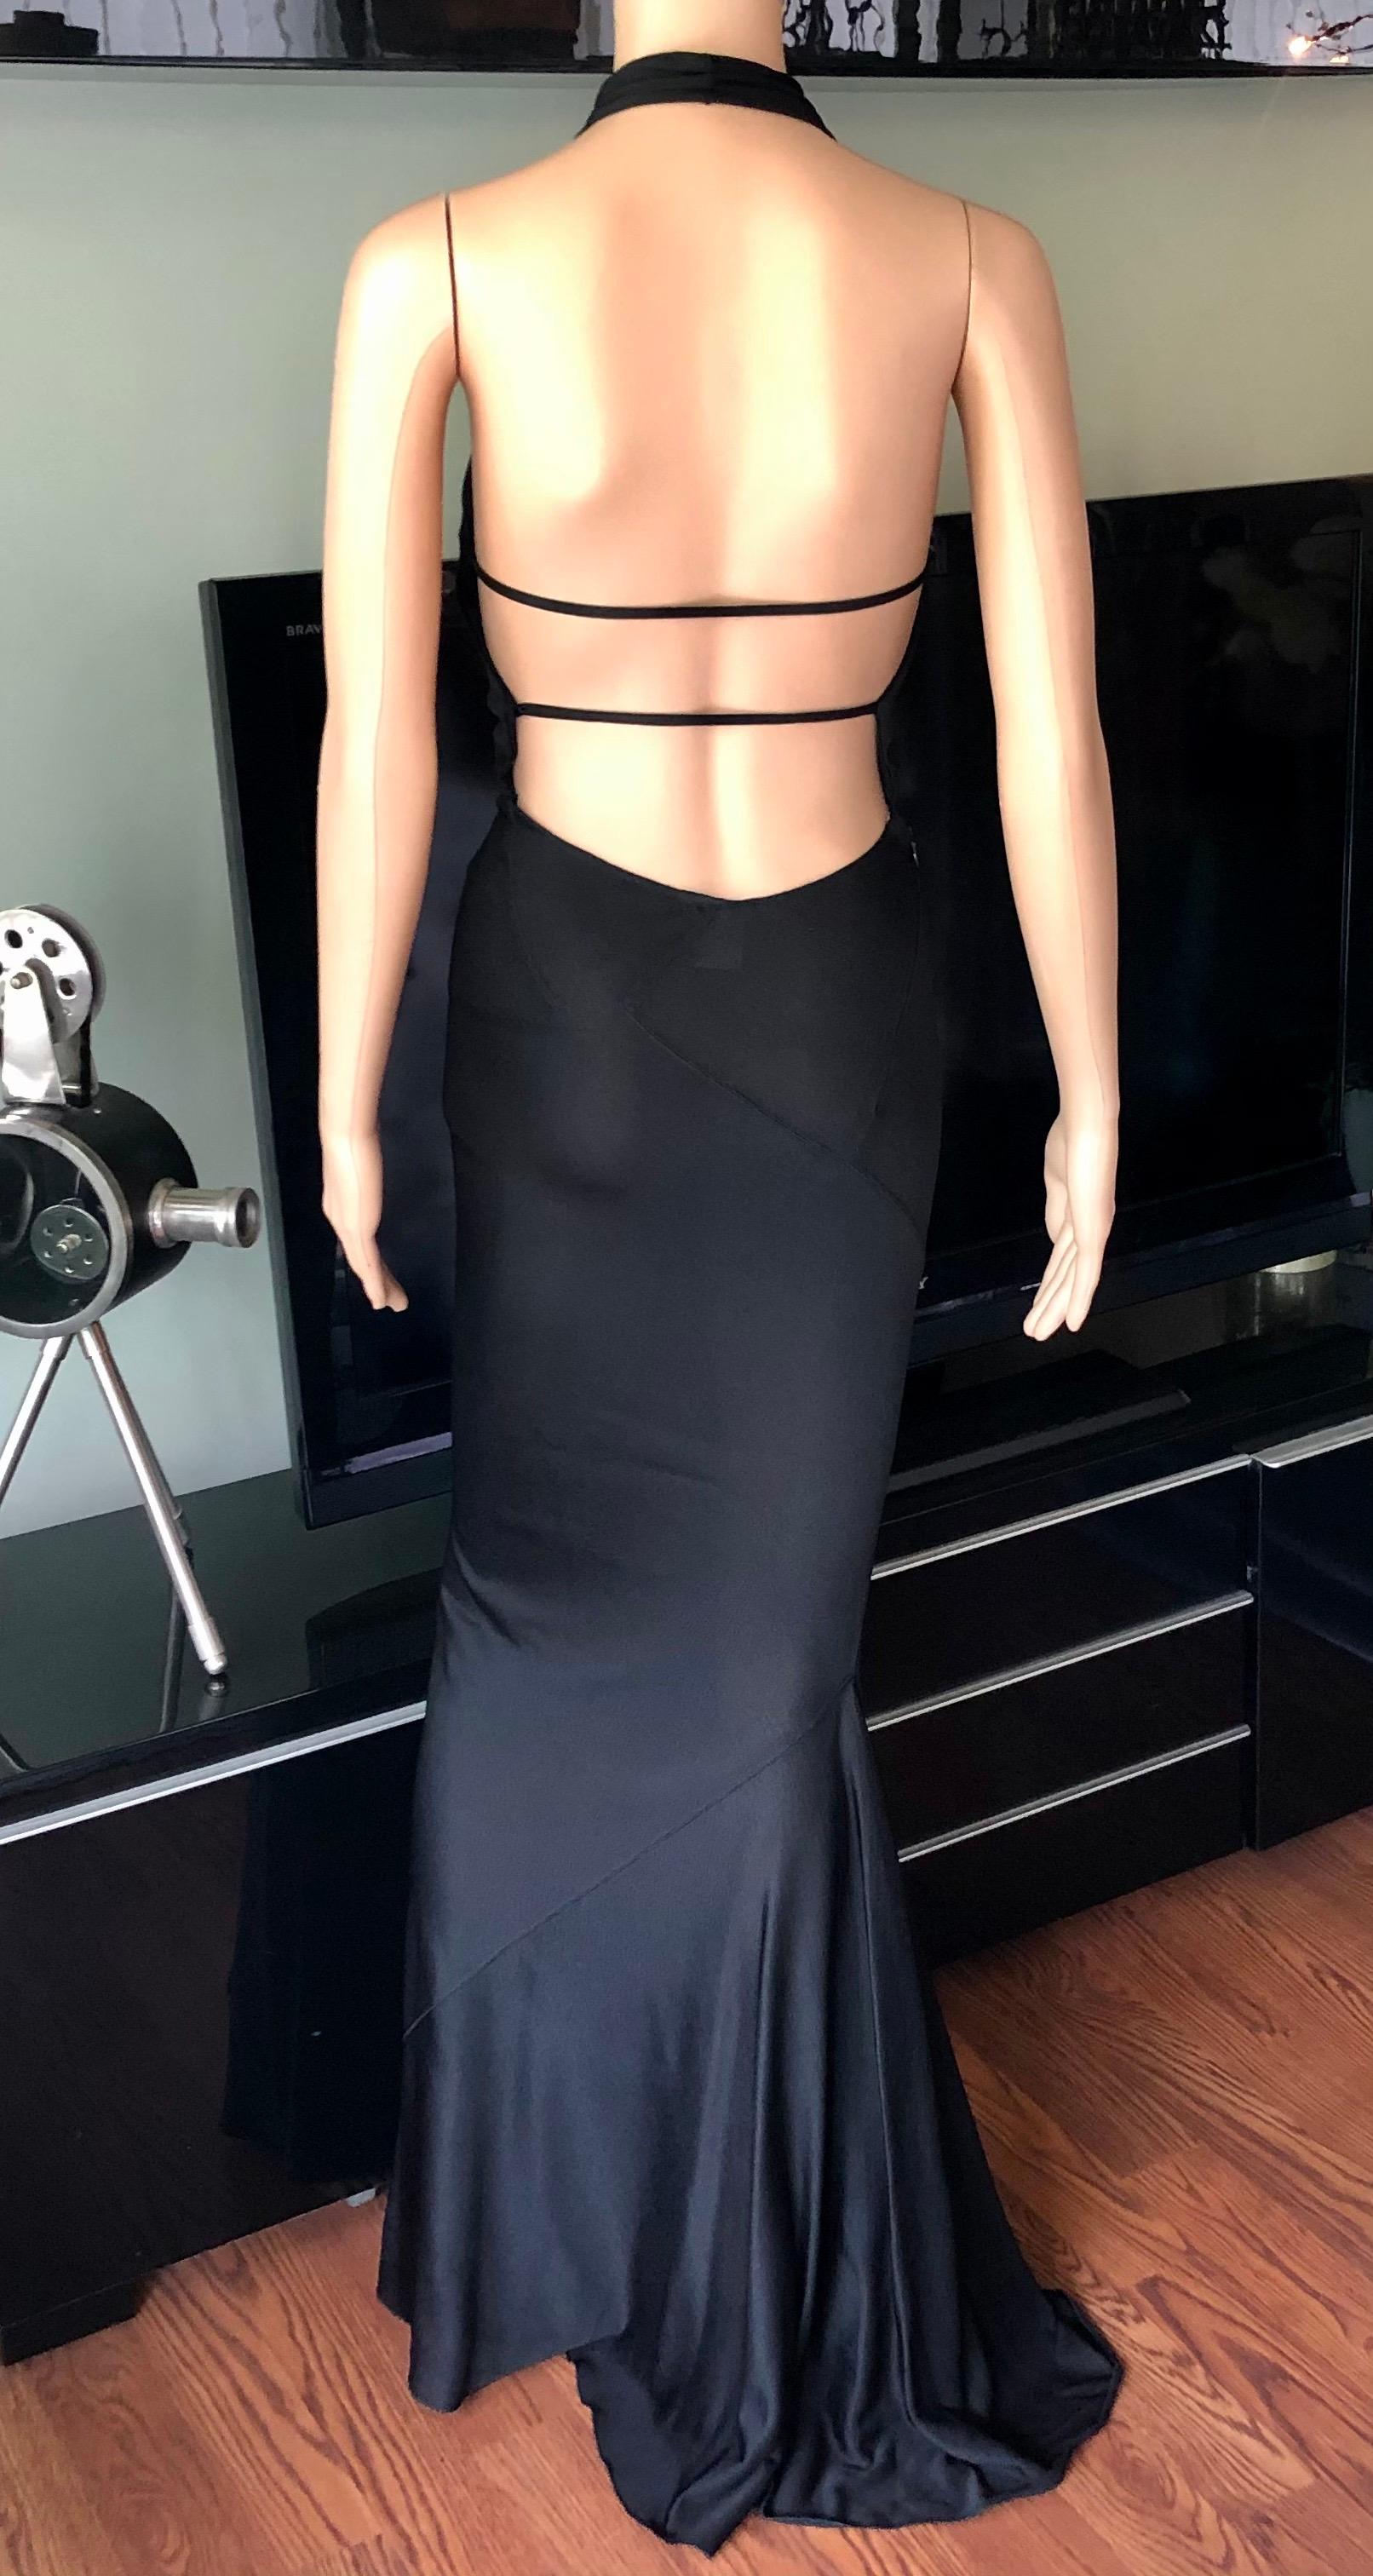 Azzedine Alaïa 2001 Vintage Halter Backless Black Gown Maxi Dress Size M

Alaïa black maxi dress featuring halter neckline, open back. flared hem with train and concealed zip closure at side. Please note bra pads has been added, could be easily